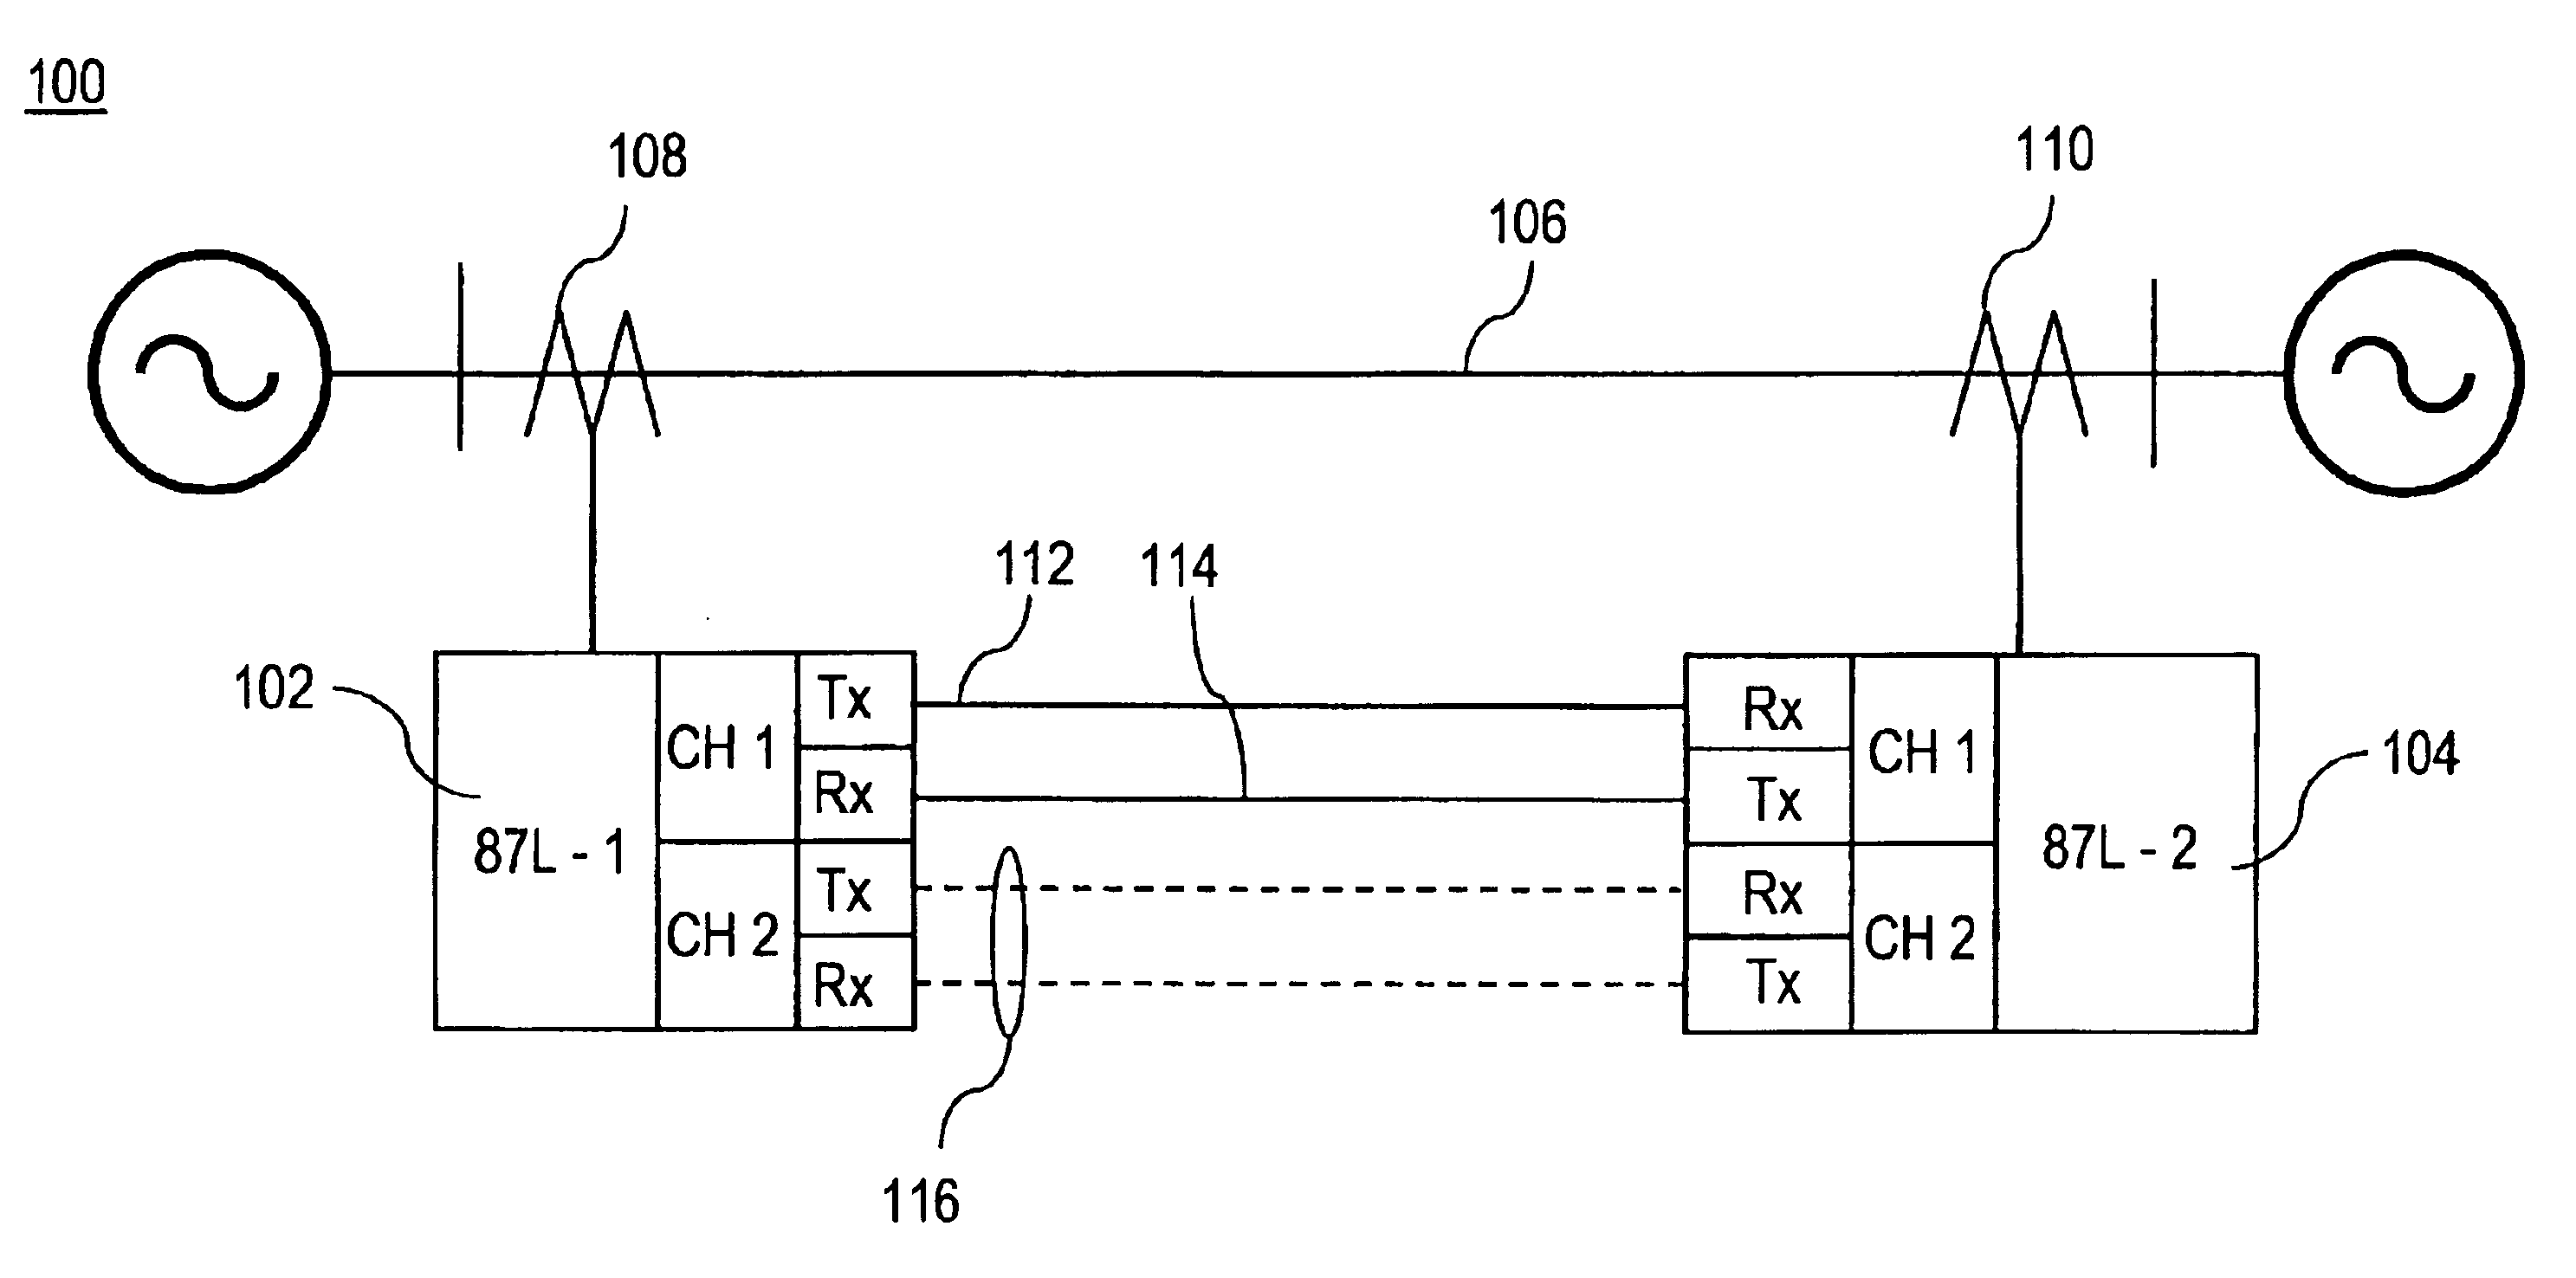 Method for canceling transient errors in unsynchronized digital current differential transmission line protection systems